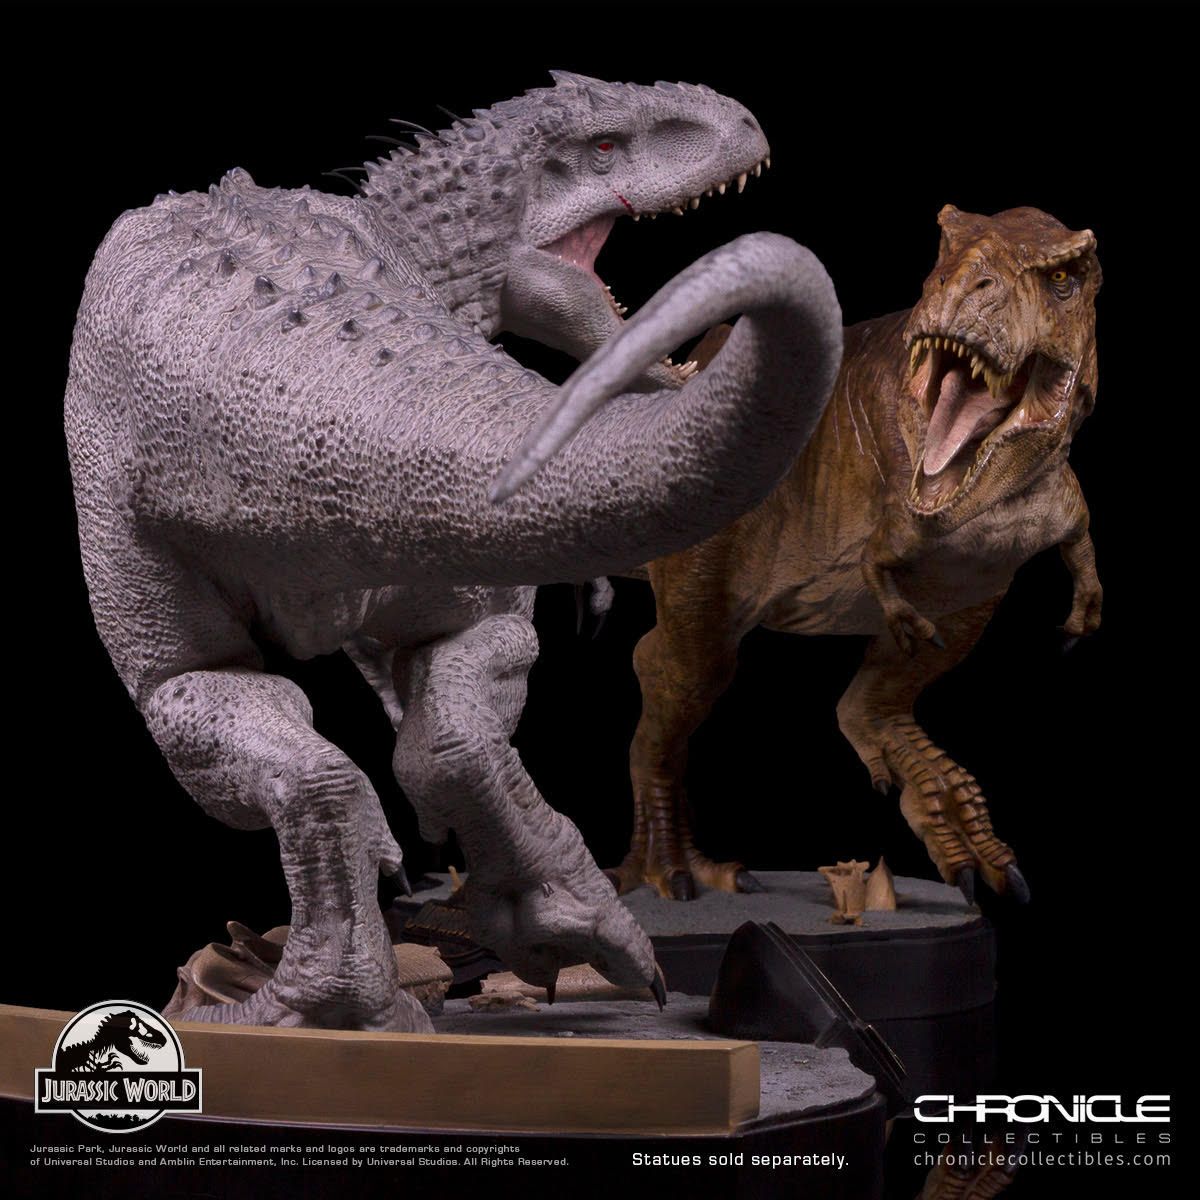 Jurassic World Battle T. Rex Statue Preview from Chronicle